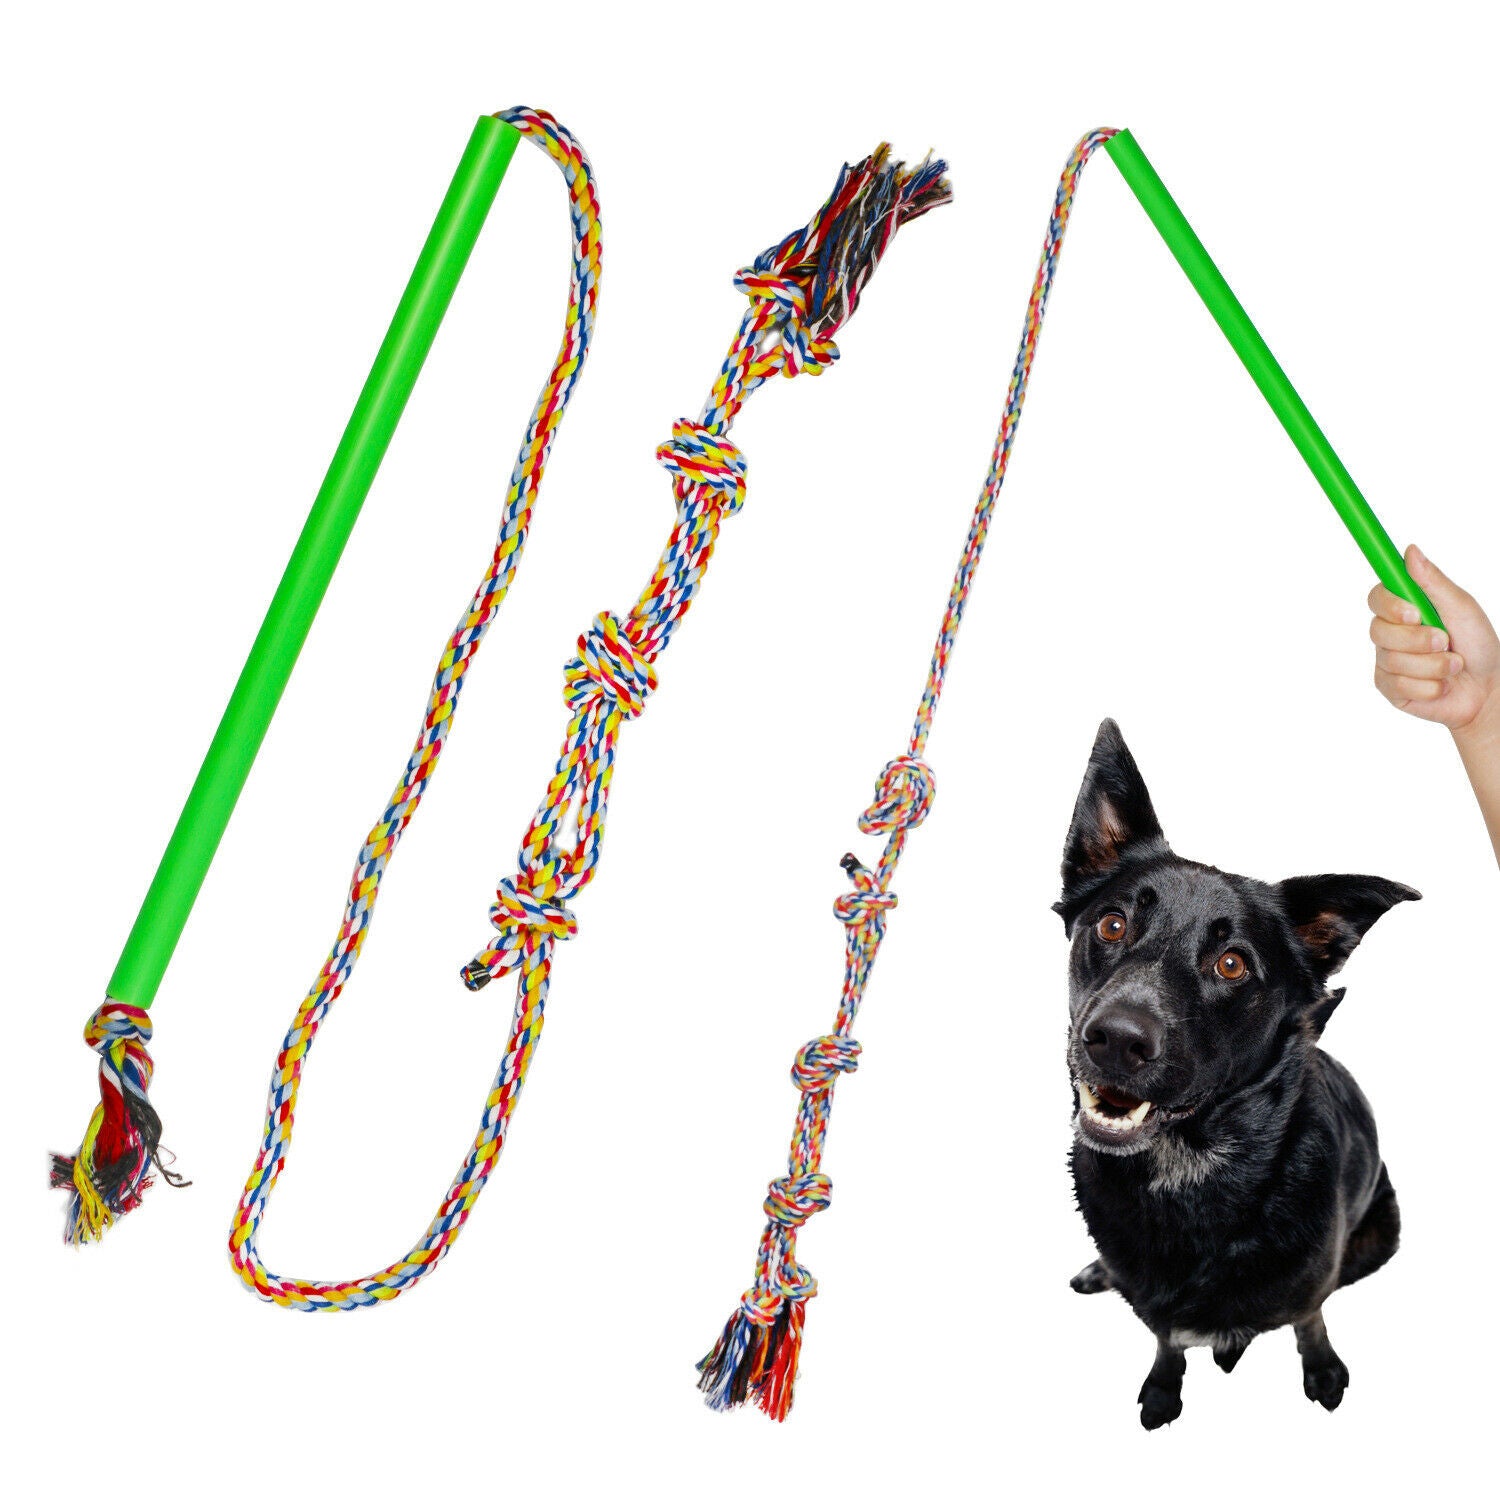 Dog Cat Extendable Teaser Pet Training Stick Pole Chasing Tail Exerciser Rope